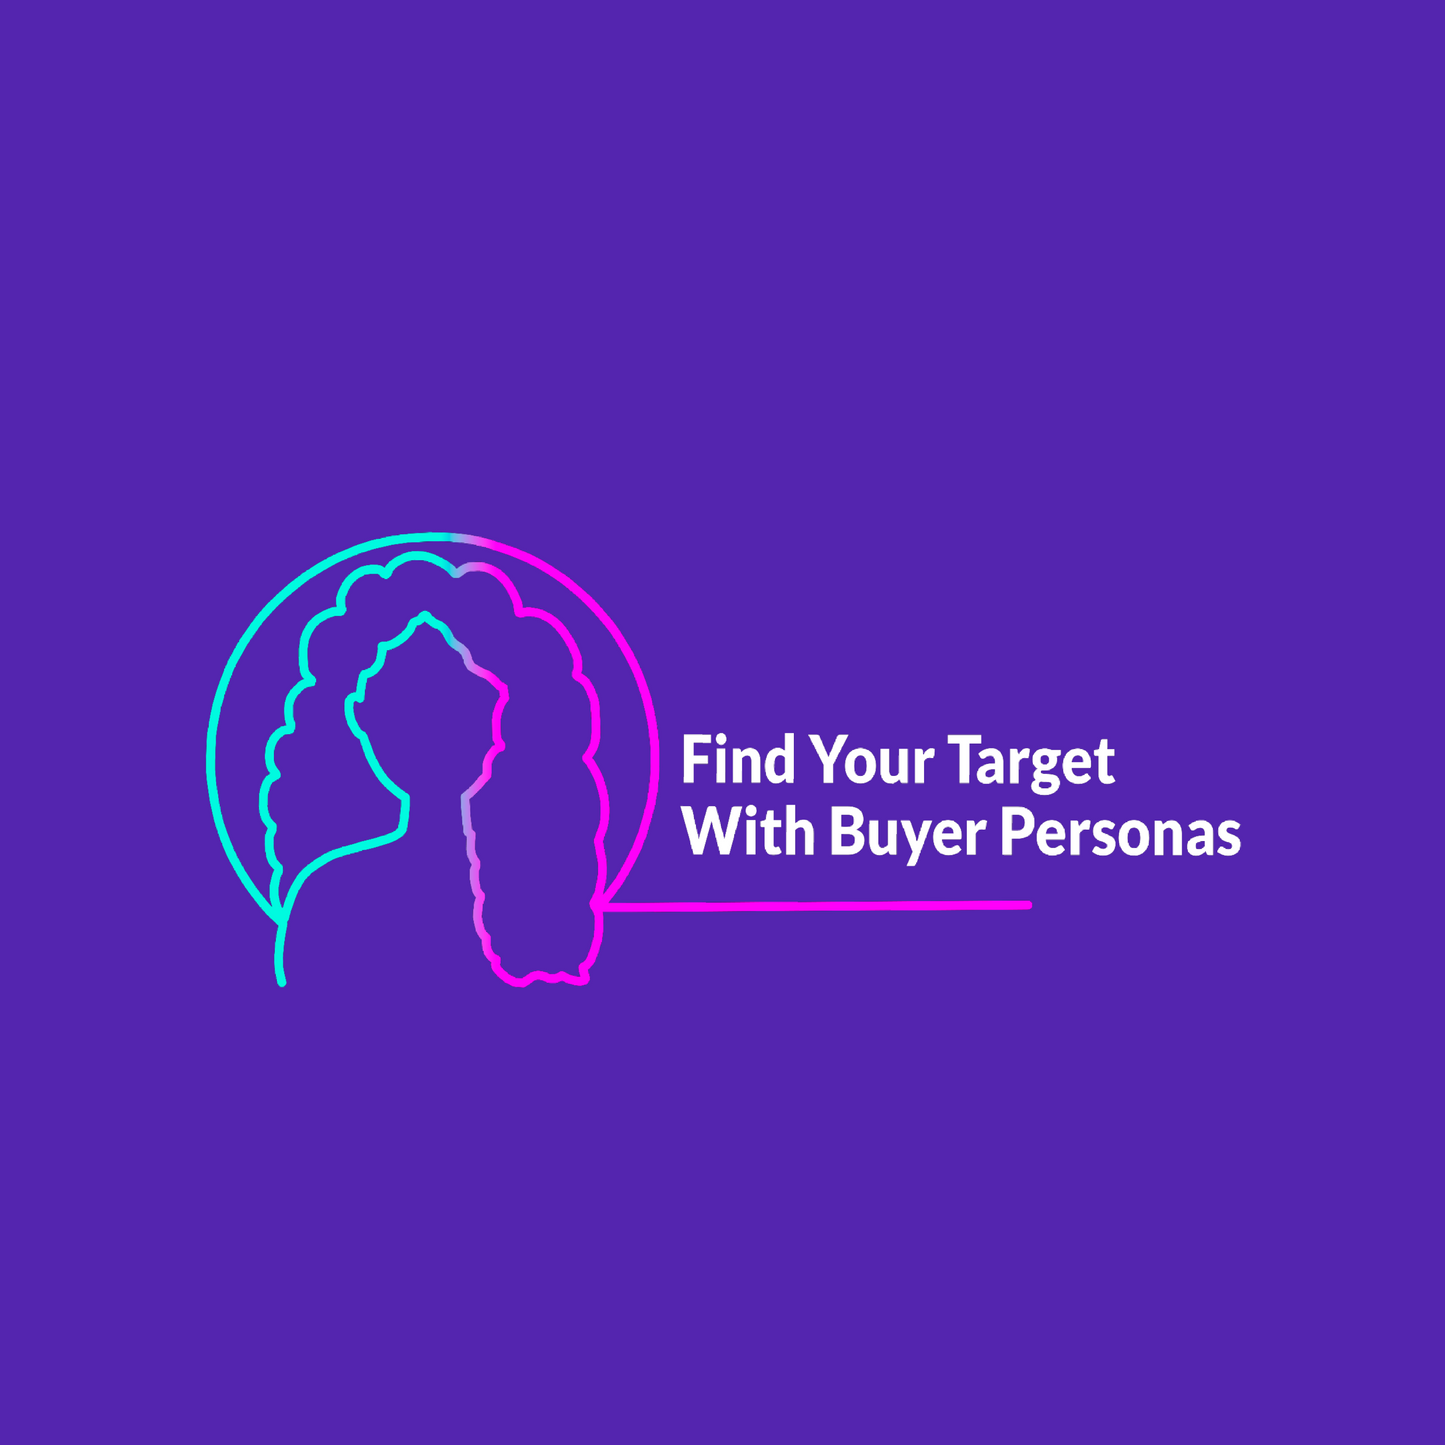 FIND YOUR TARGET WITH BUYER PERSONAS